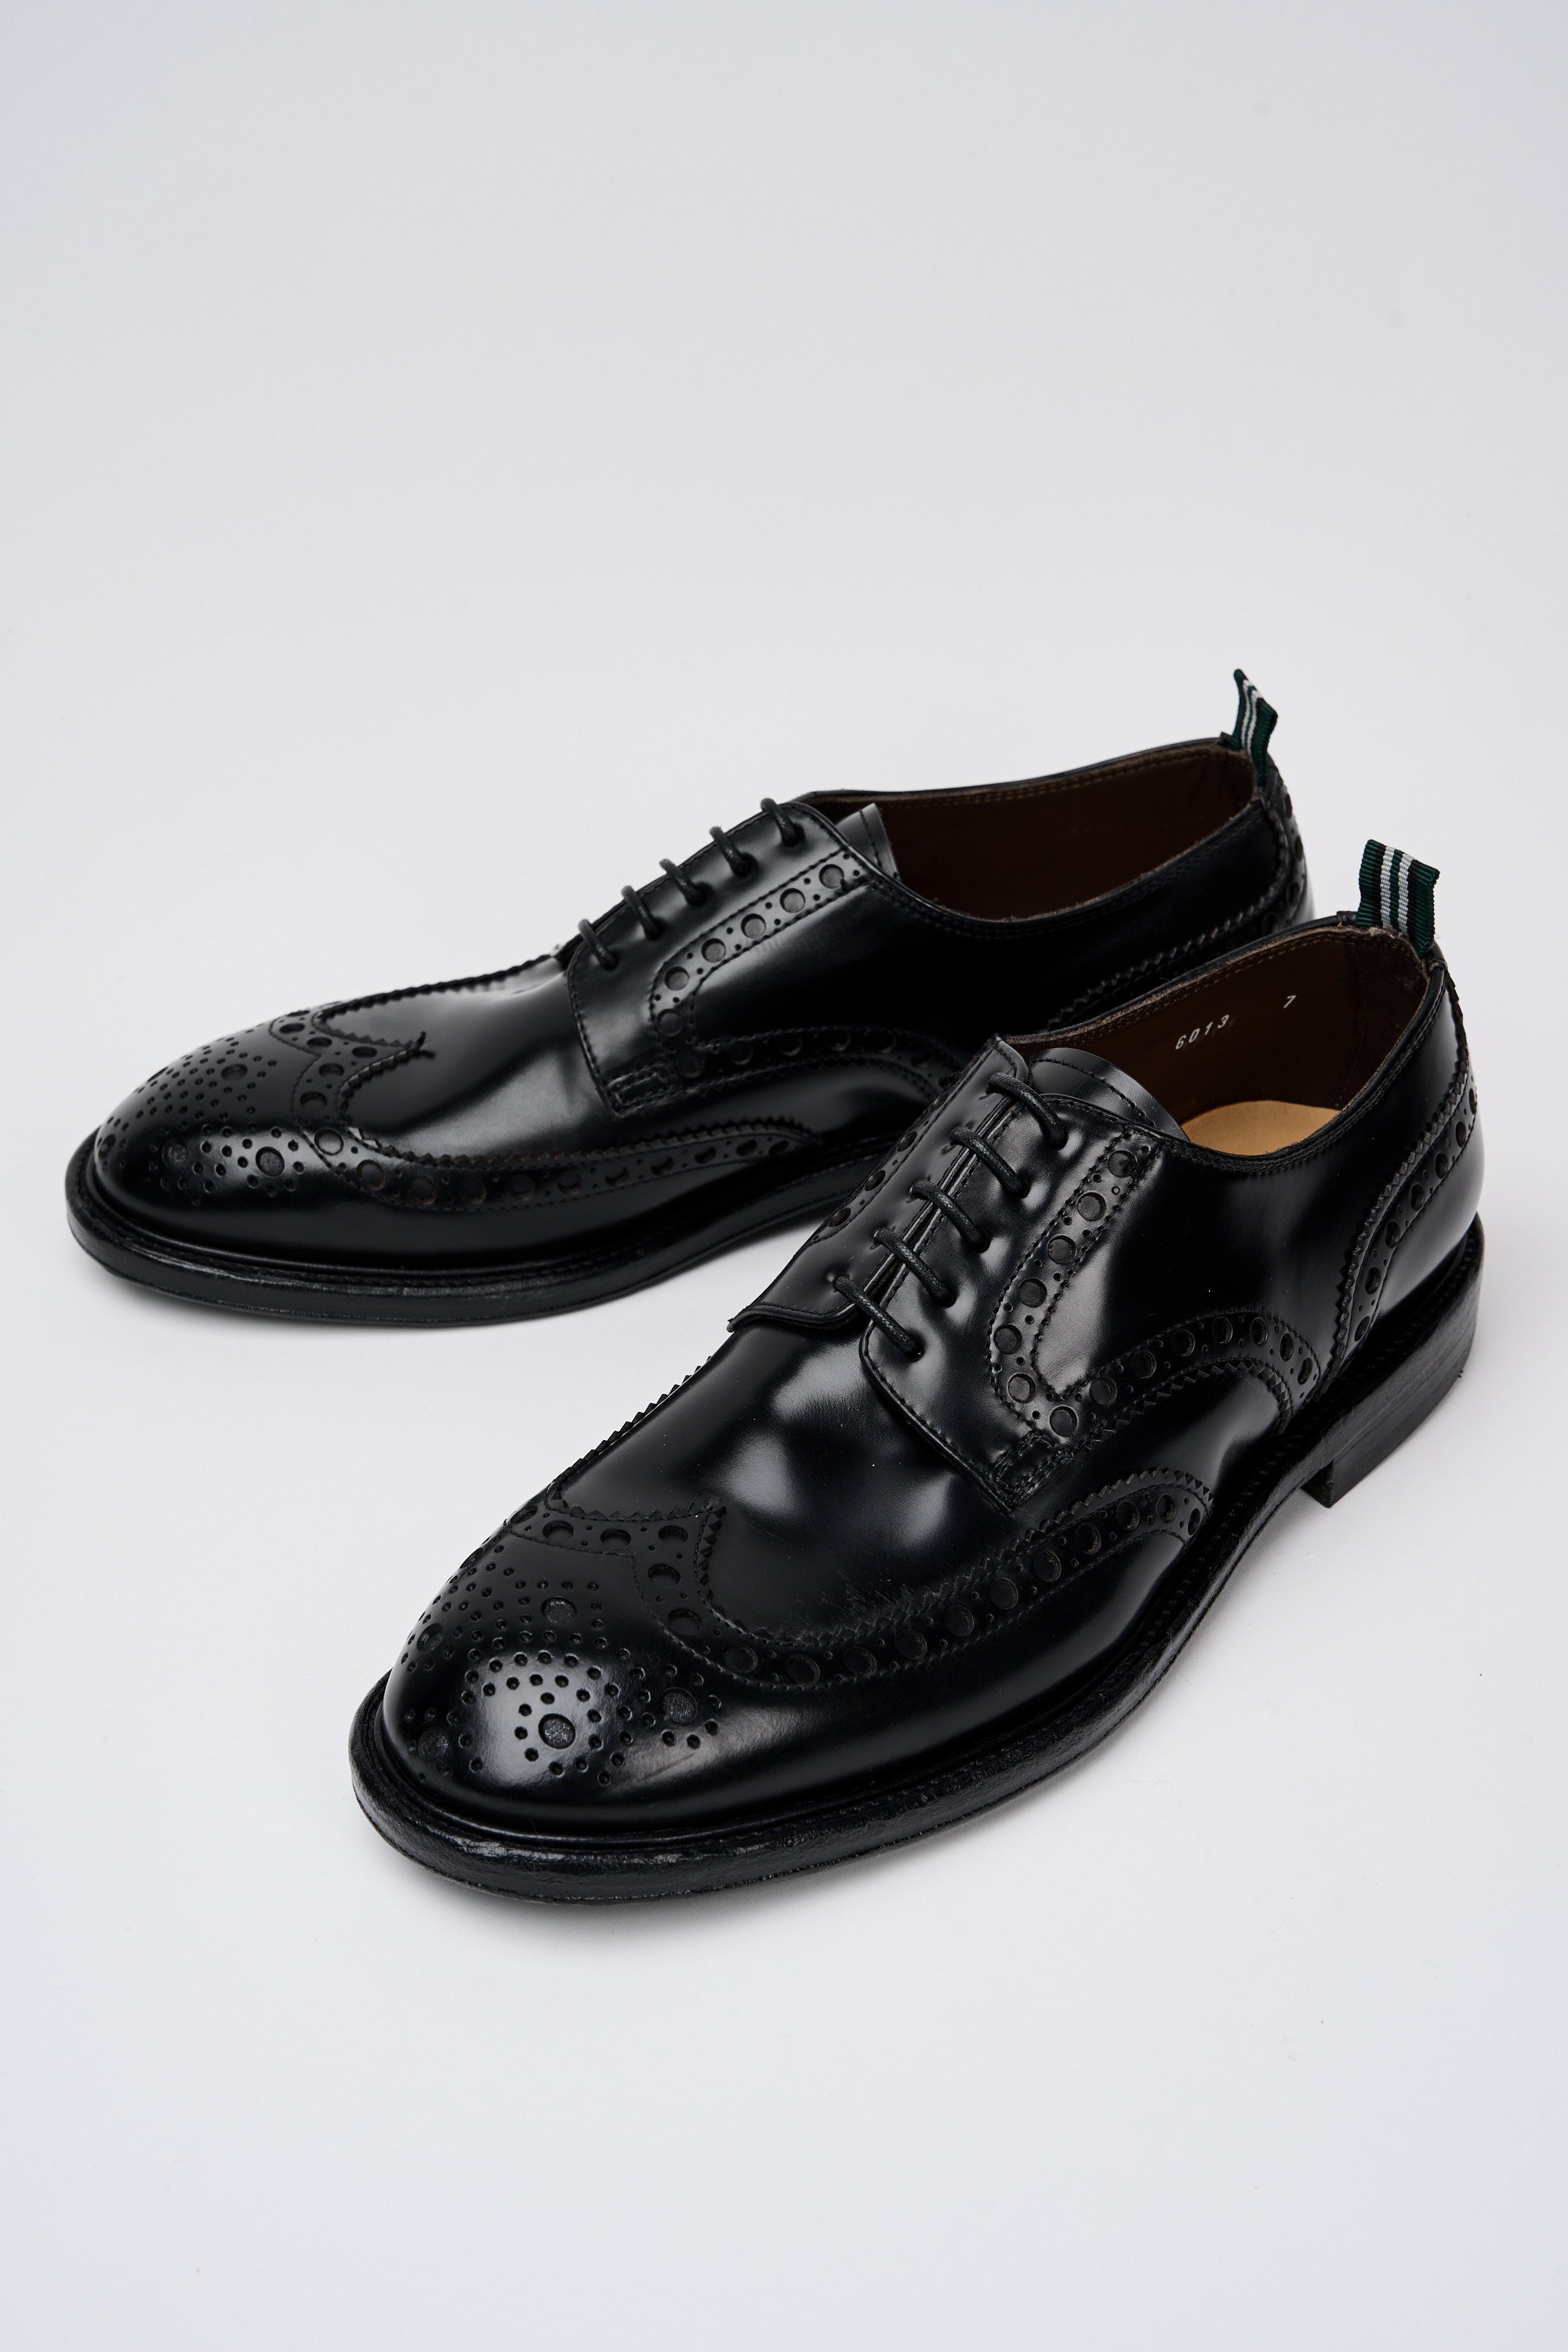 Green George Brogue Perforated Black Leather Shoe-6